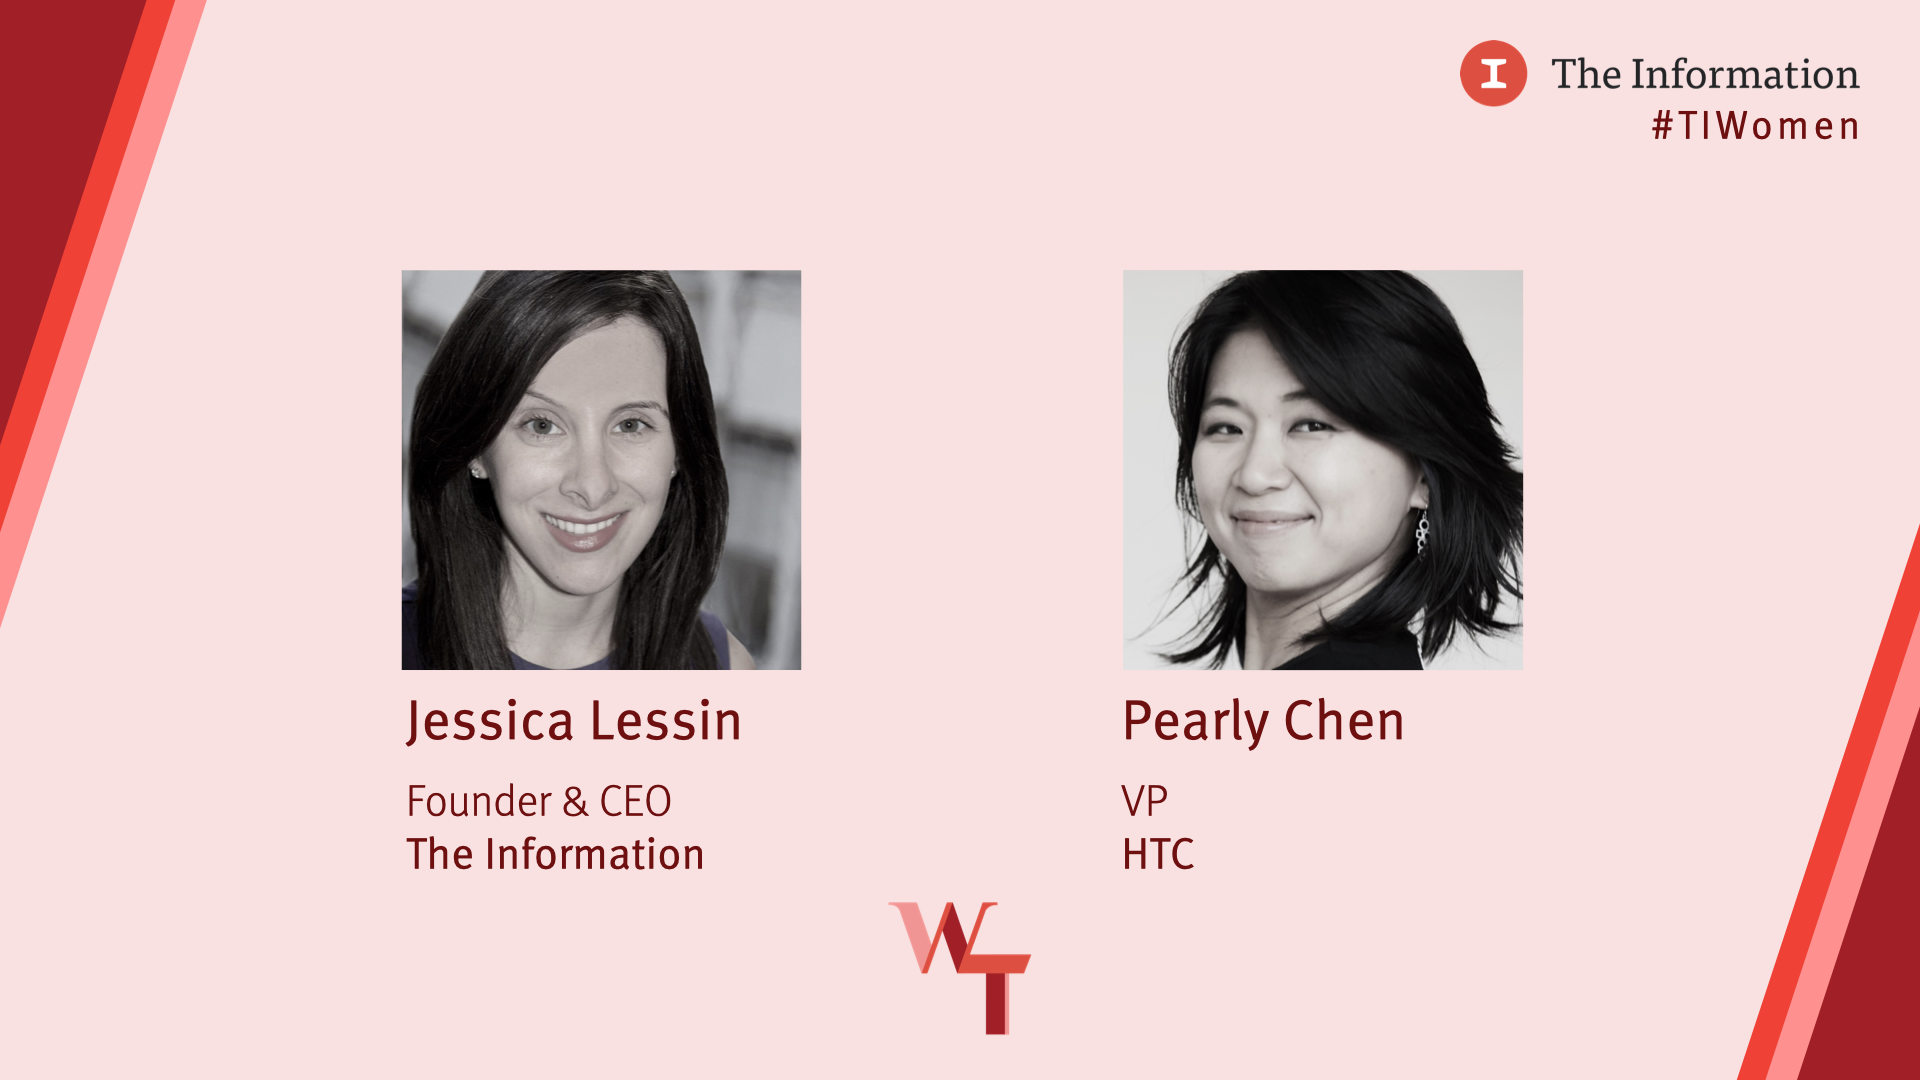 Women in Tech: Customers of the Future - Pearly Chen, VP, HTC, in conversation with Jessica Lessin, Founder & CEO, The Information